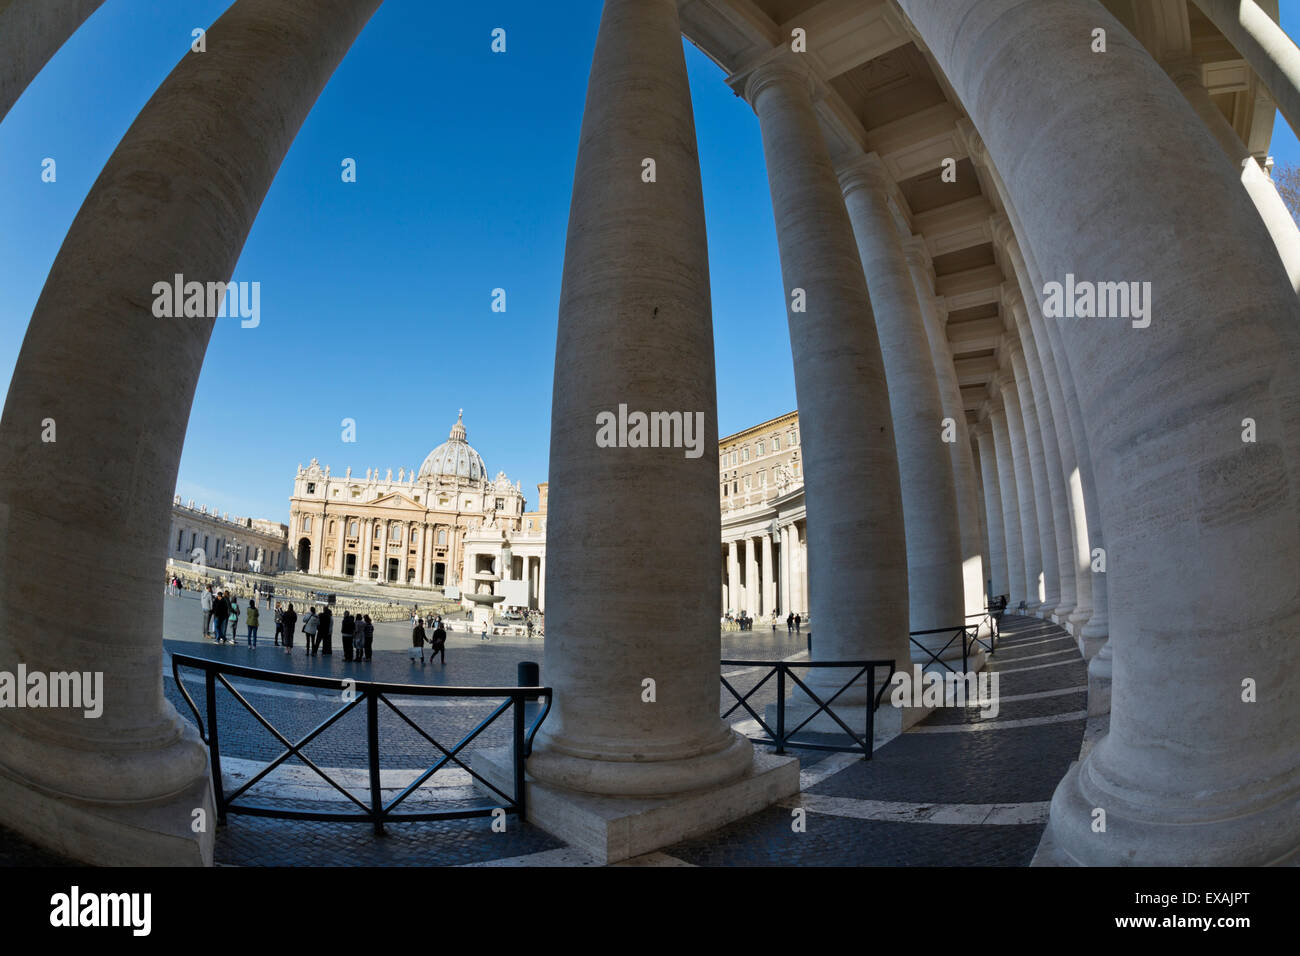 S.t Peter's Basilica and the colonnades of St. Peter's Square (Piazza San Pietro), UNESCO Site, Vatican City, Rome, Lazio, Italy Stock Photo